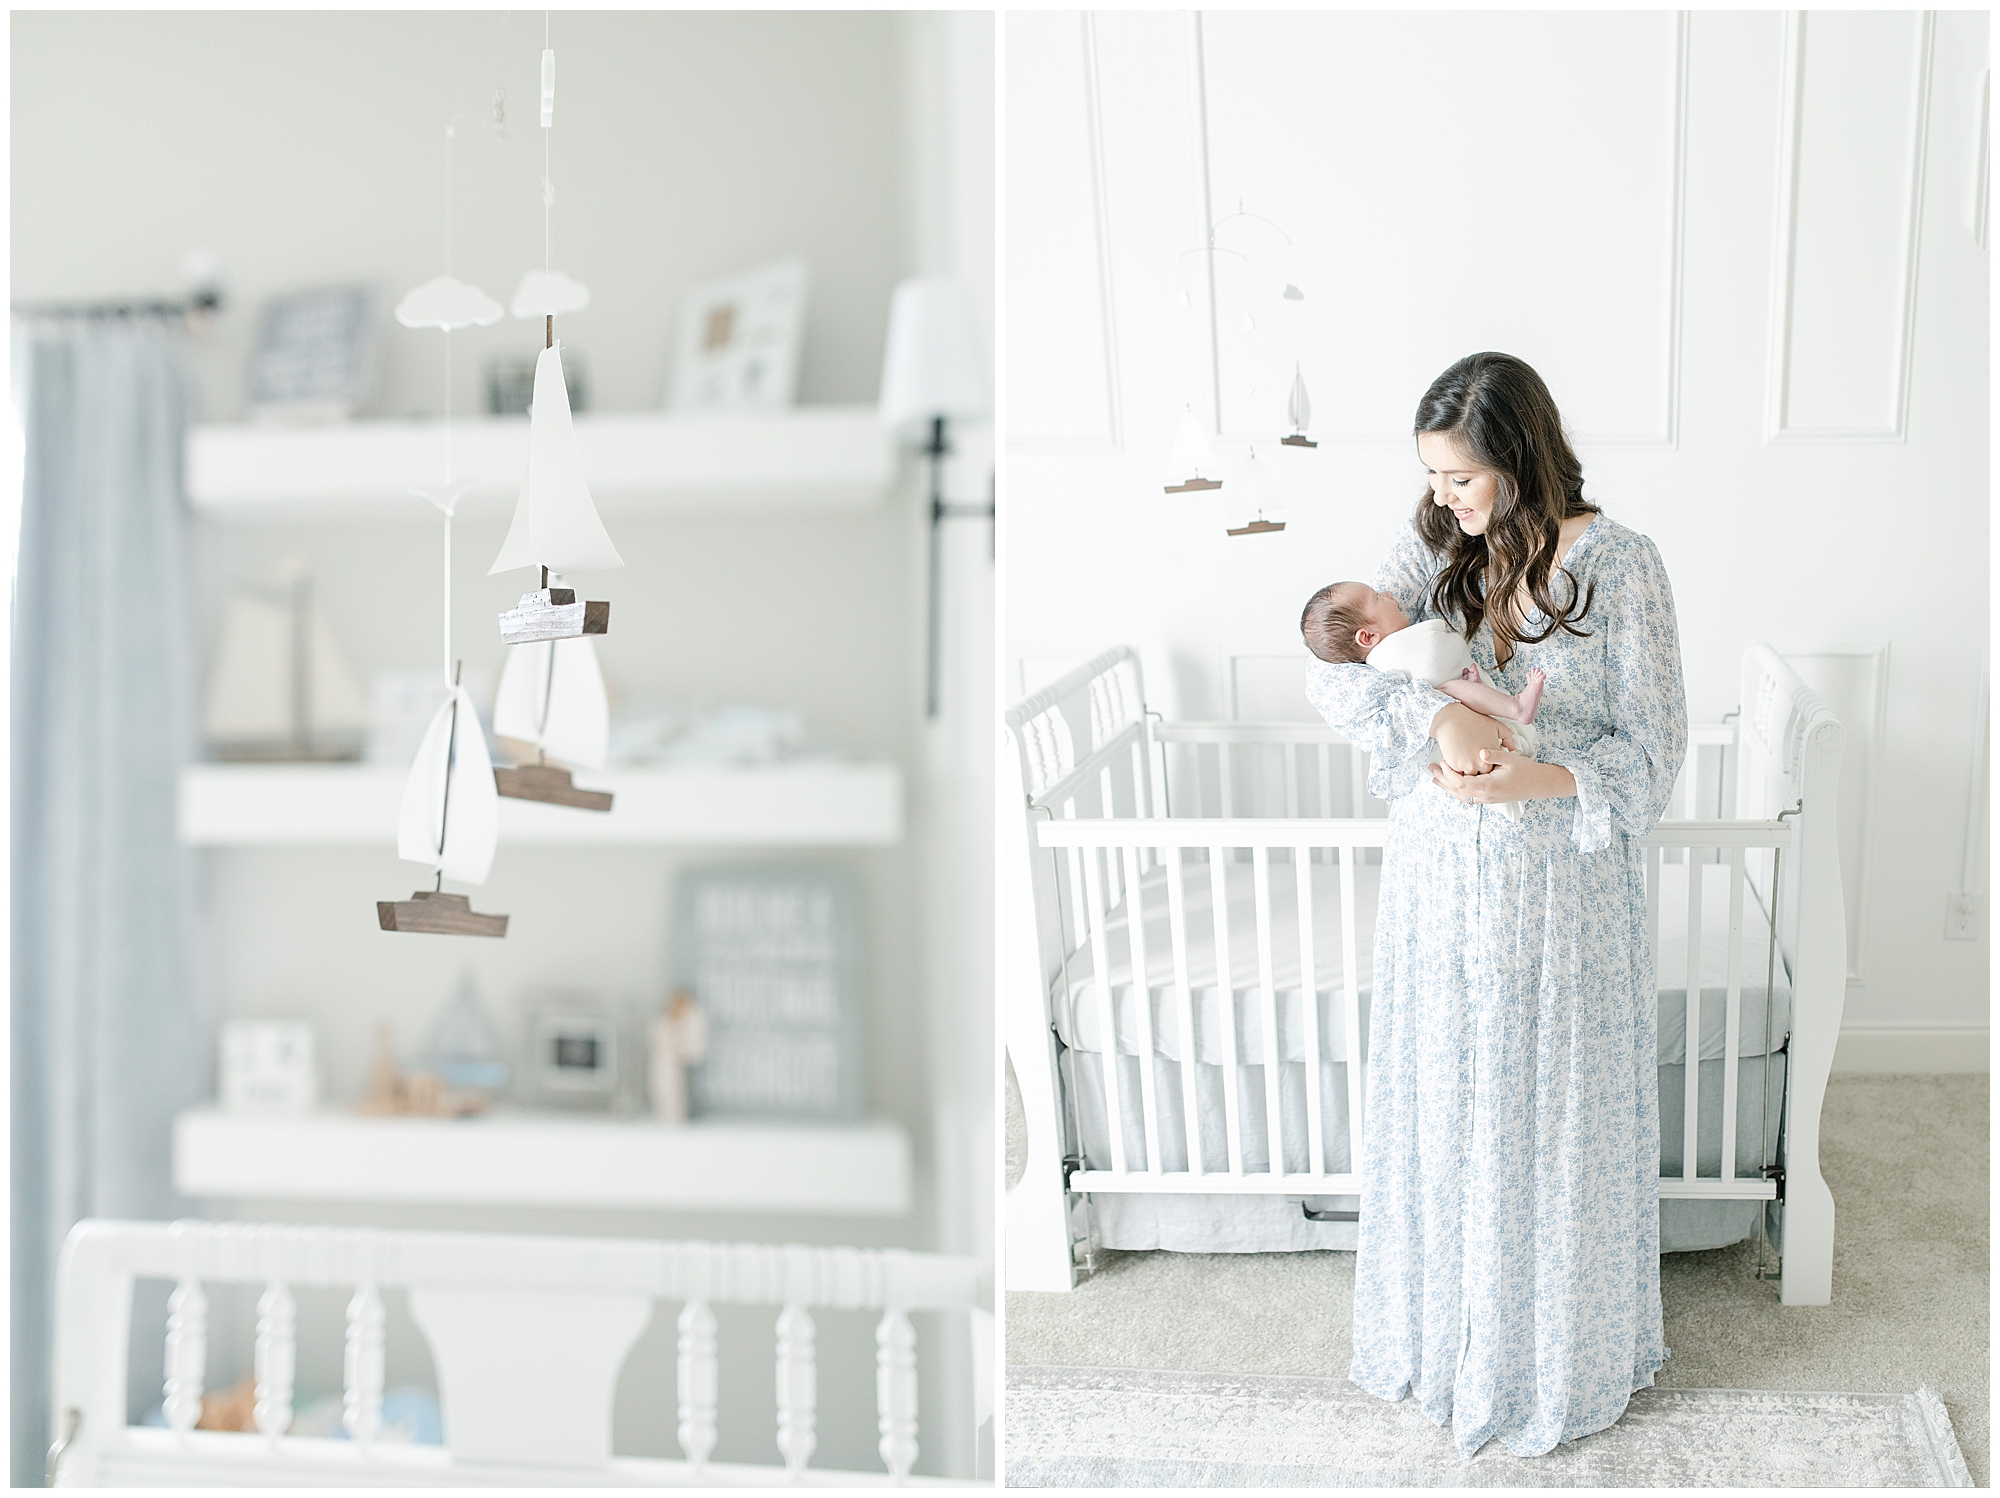 Details of nautical themed nursery. Mom and baby embracing. Photo by Little Sunshine Photography.